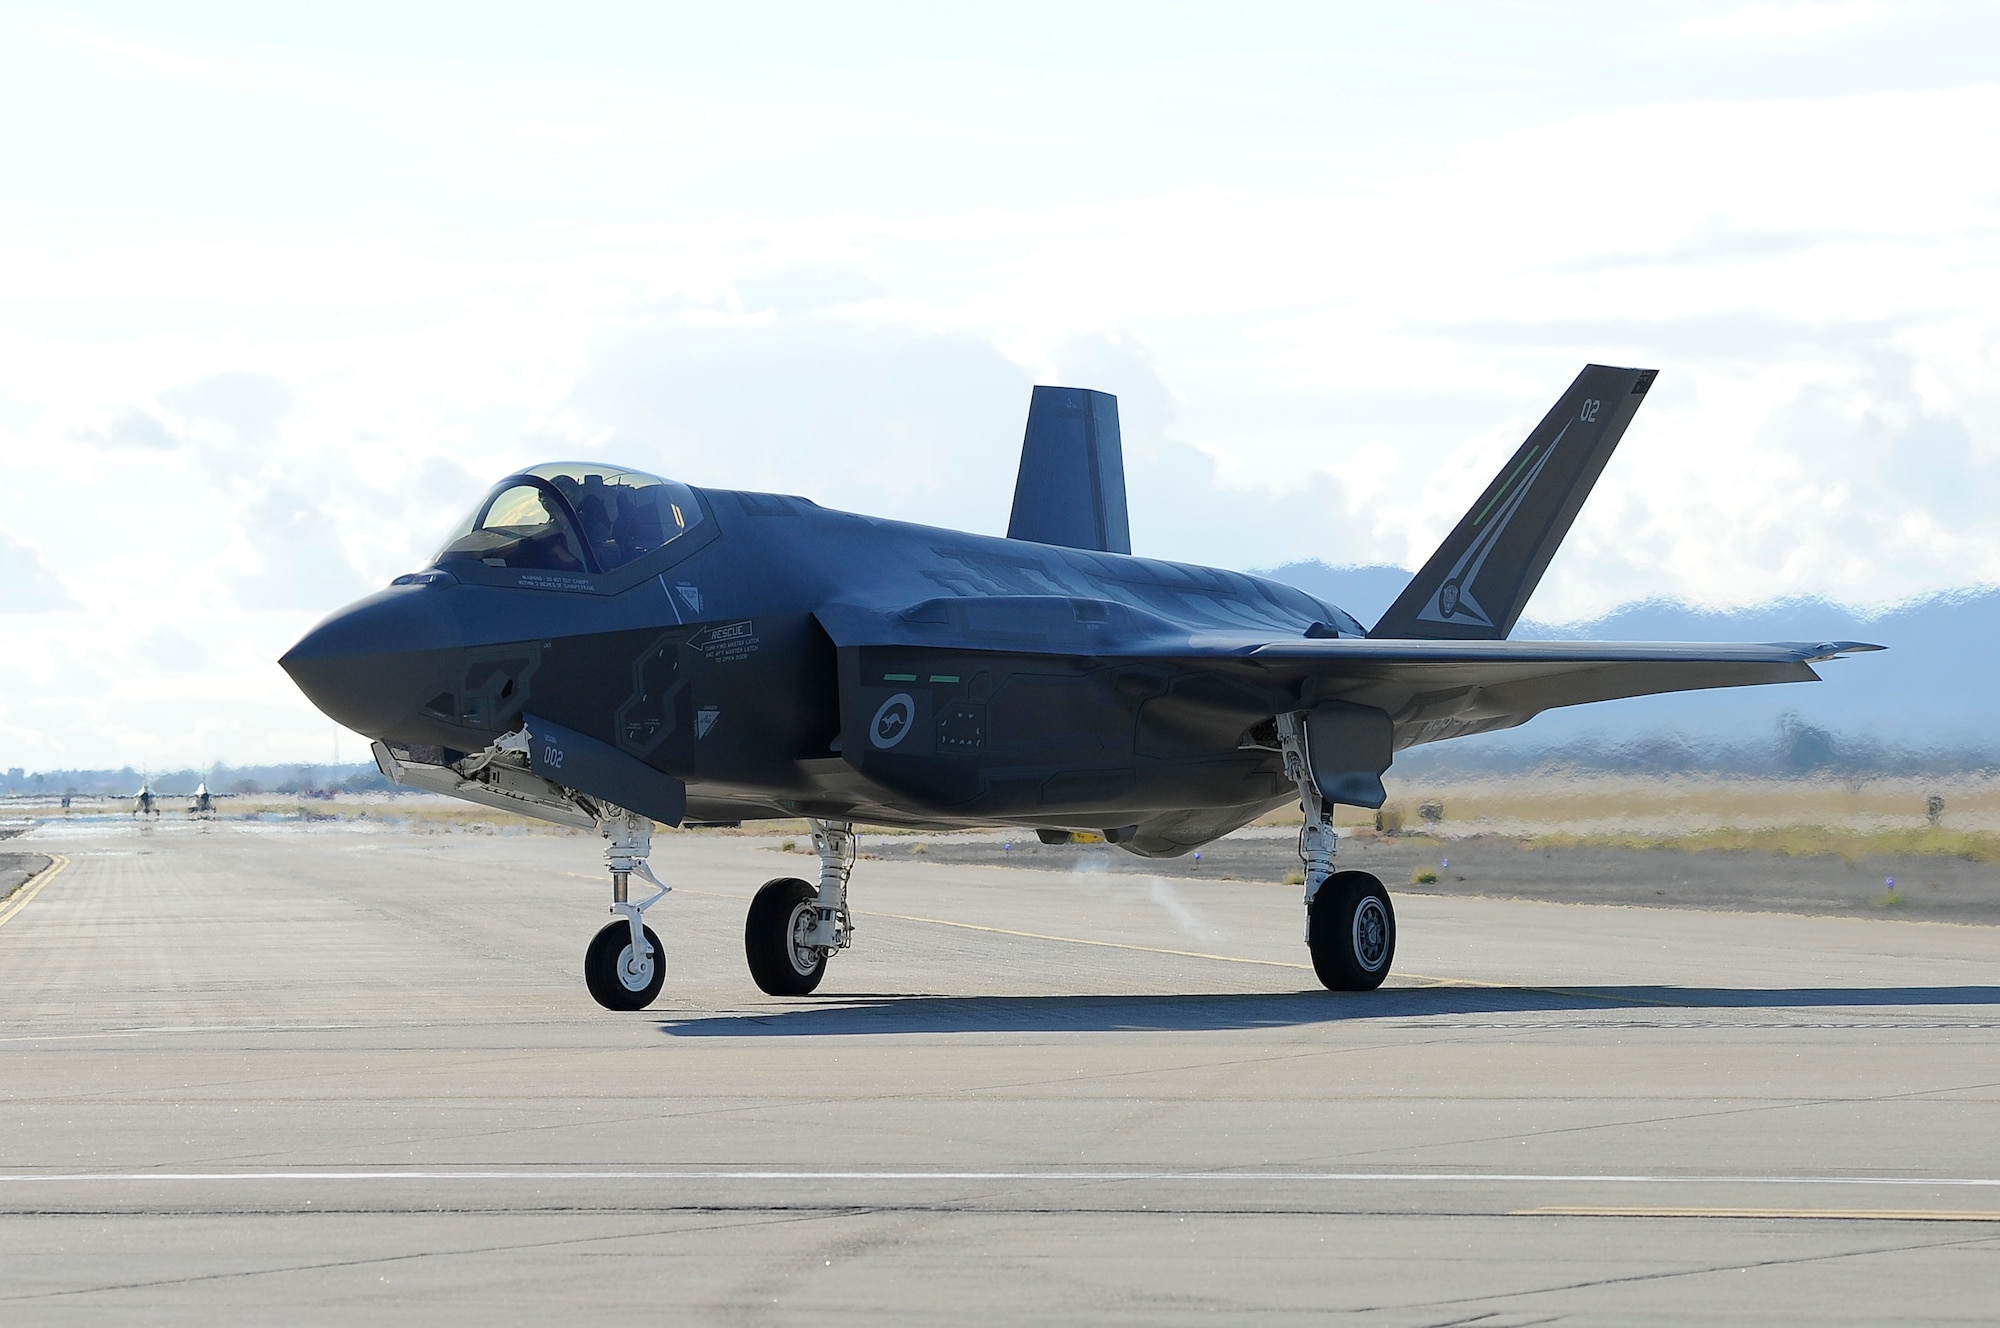 The first Royal Australian Air Force F-35A Lightning II jet arrived at Luke
Air Force Base Dec. 18, 2014. The jet's arrival marks the first
international partner F-35 to arrive for training at Luke. (U.S. Air Force photo by Airman Pedro Mota) 
